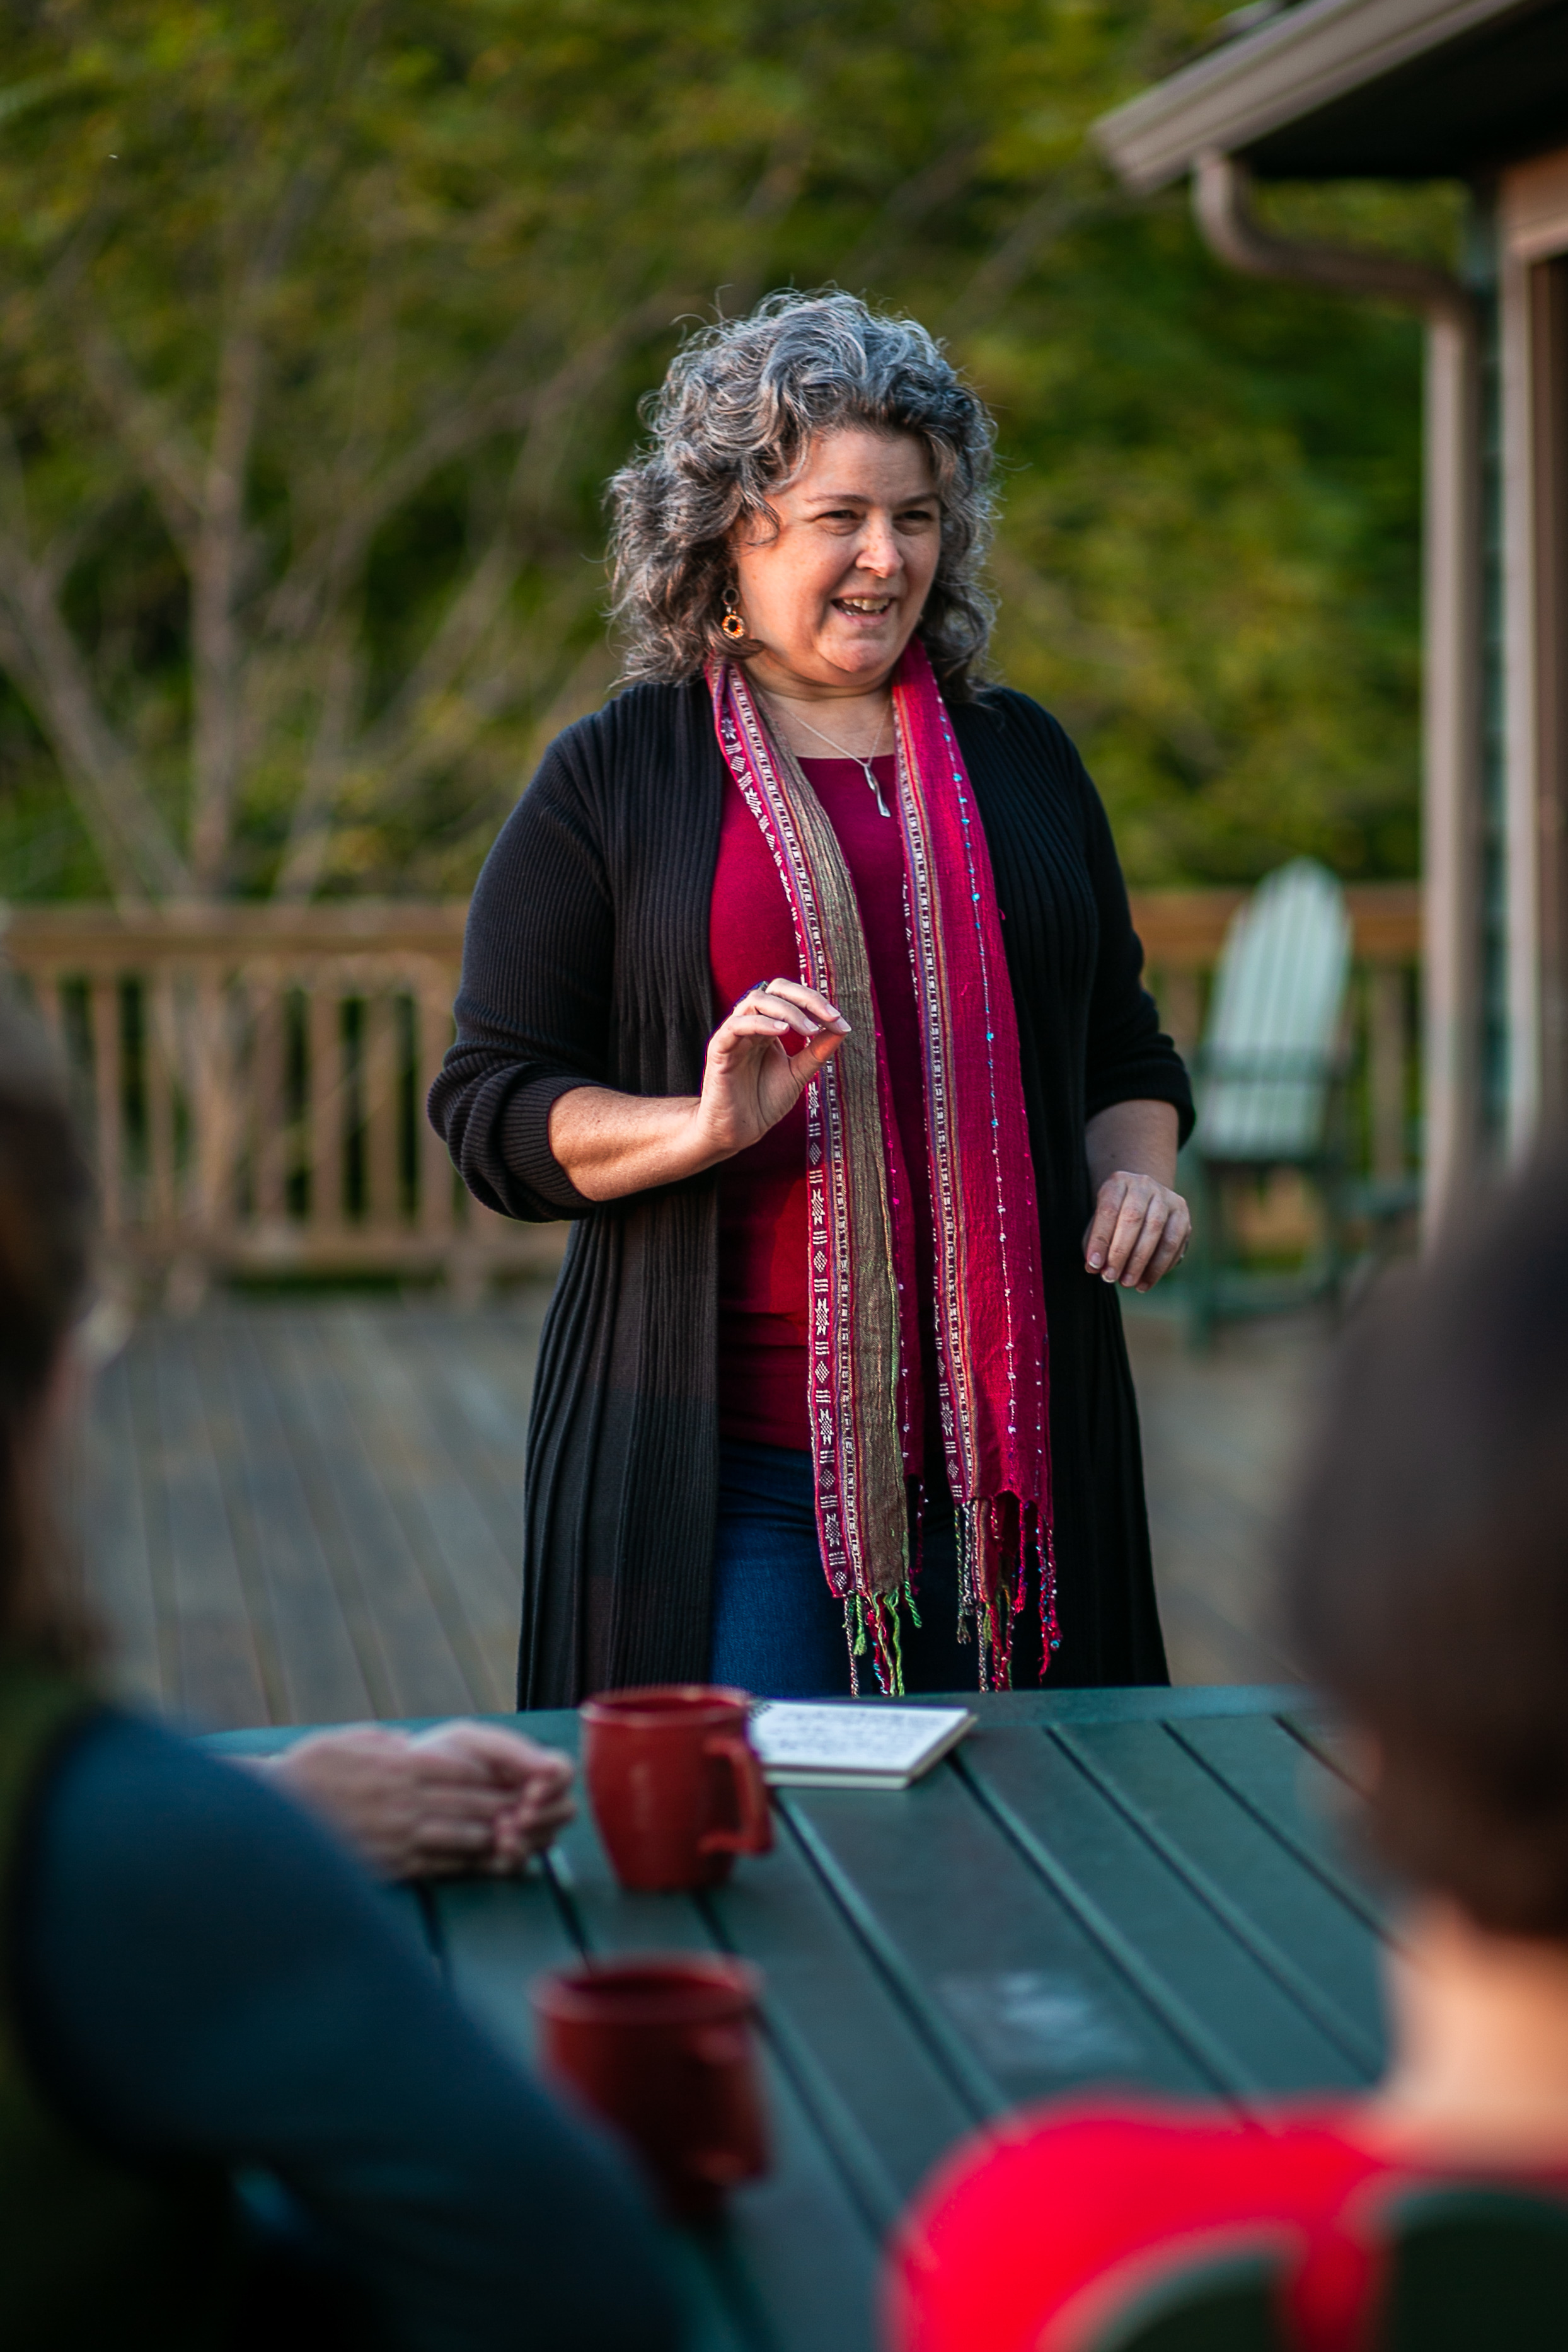 Cat Lazaroff, consultant and facilitator, leads a group discussion in a relaxed outdoor setting.